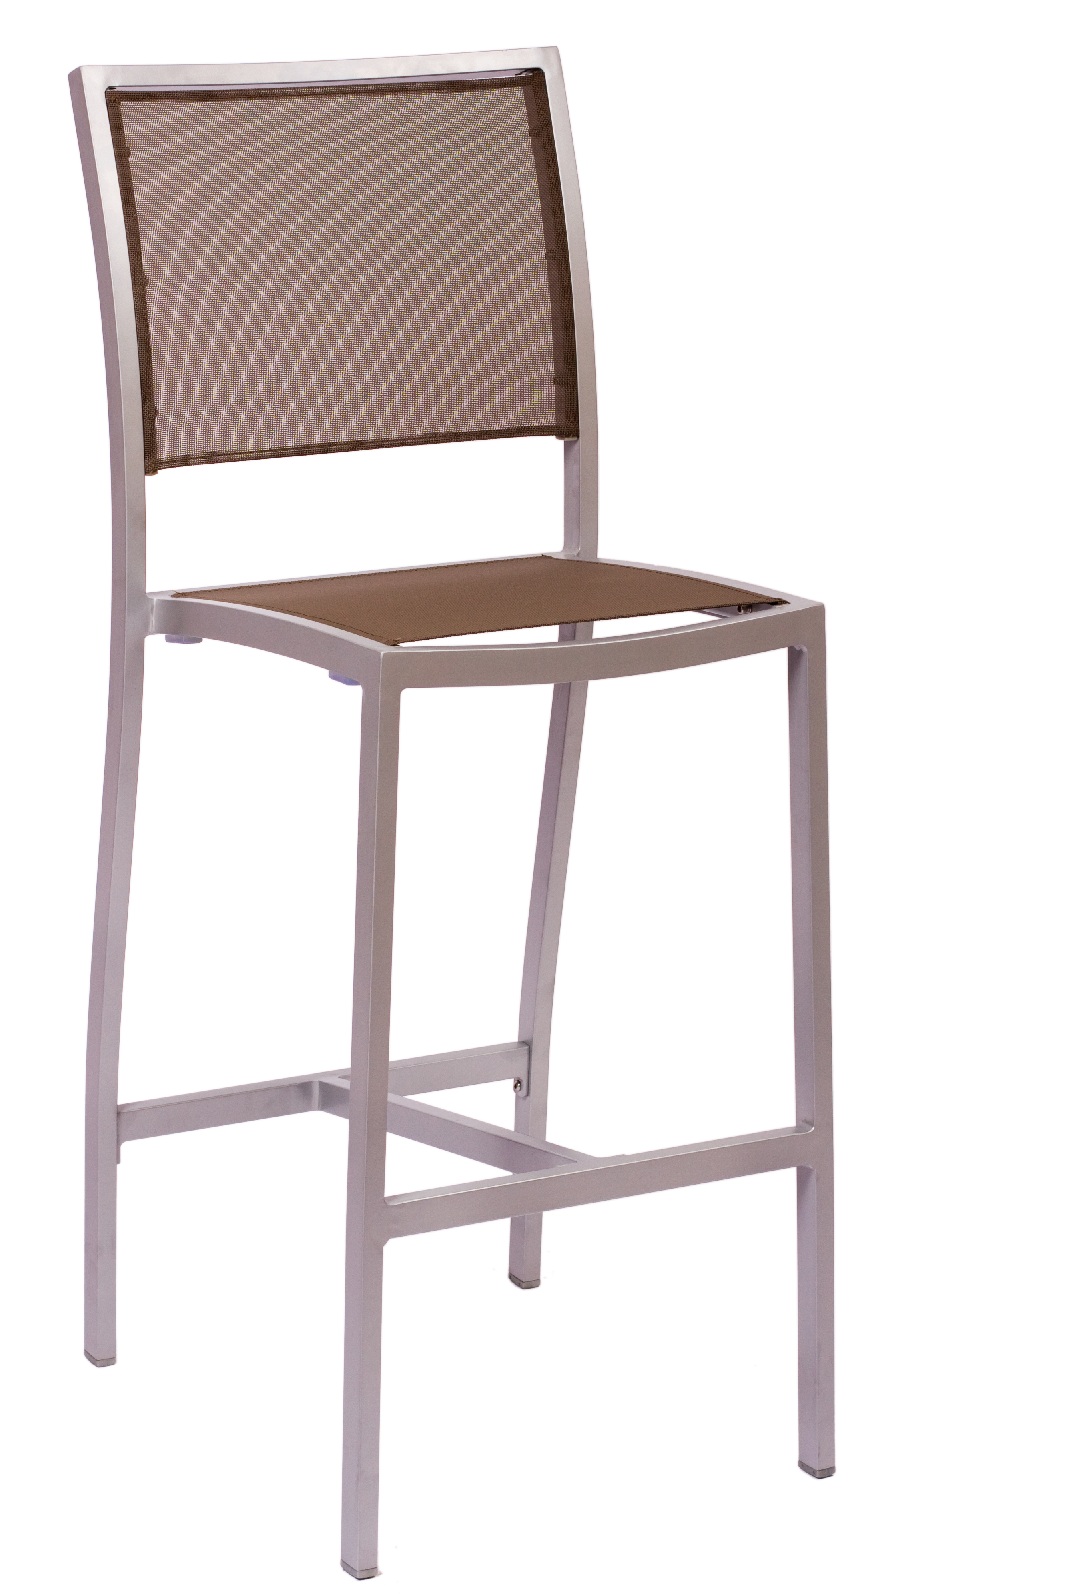 BFM Delray Side Barstool- Silver/Taupe /Aluminum & Batyline